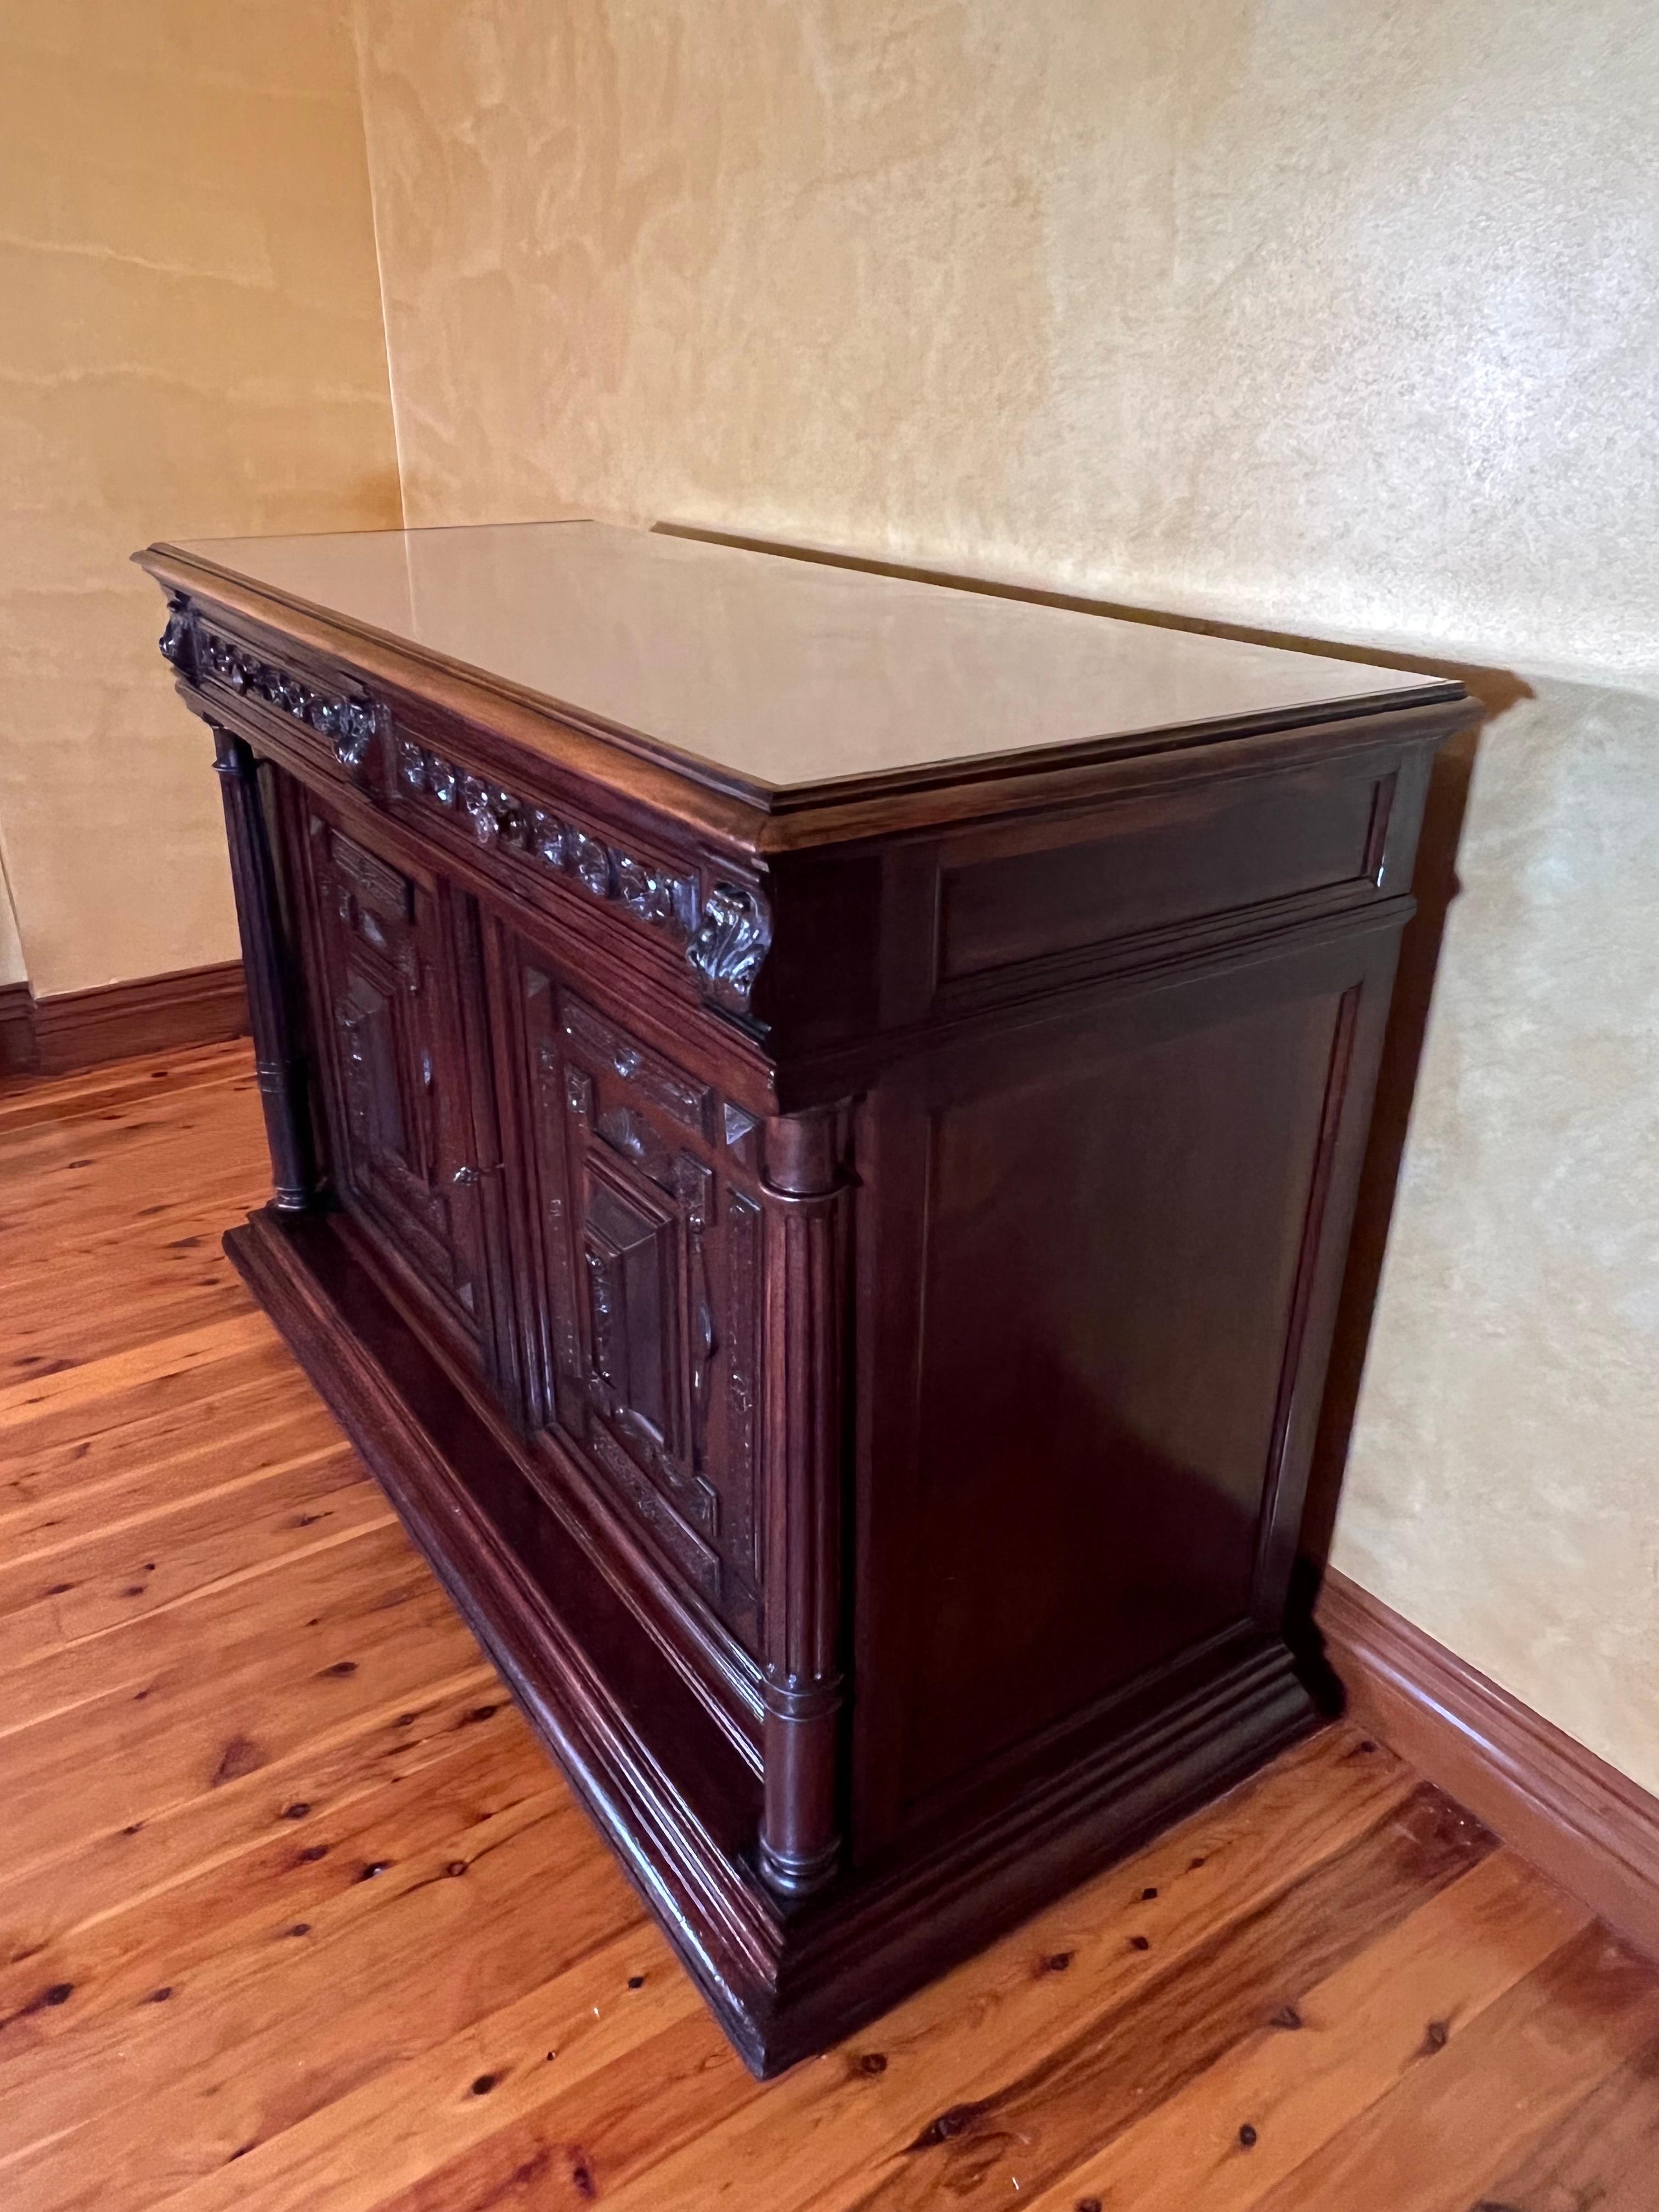 Handmade dovetails, skilfully carved detail throughout, reeded columns, comes with key, marble top, 2 drawer, 2 door.

Circa:1880

Material: Walnut & Marble

Country of Origin: France

Measurements: 100cm high, 143cm length, 61cm deep.